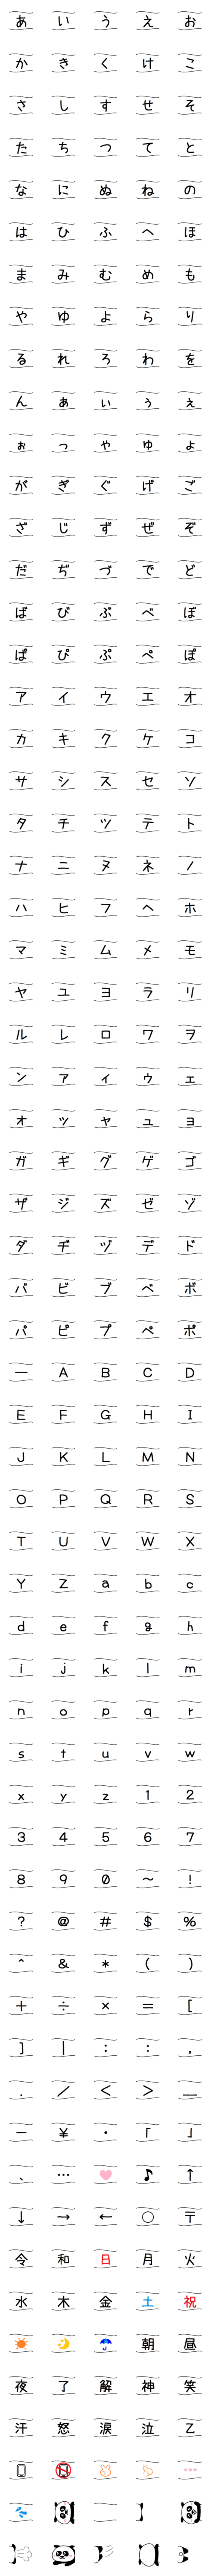 [LINE絵文字]かわいいパンダと文字が伸びる絵文字の画像一覧